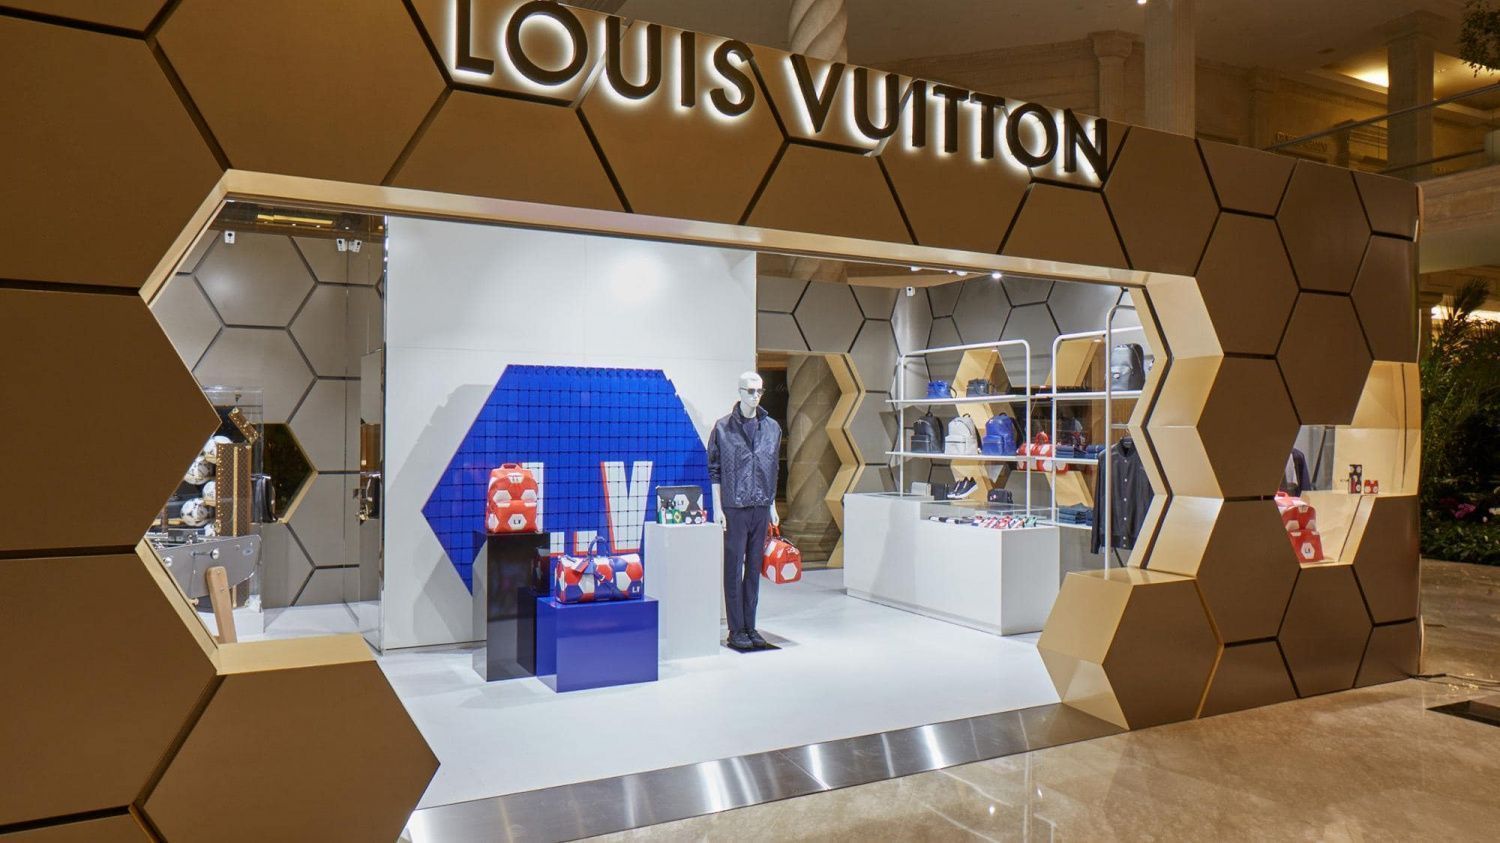 Louis Vuitton opened a pop-up store in Crocus City Mall in Moscow